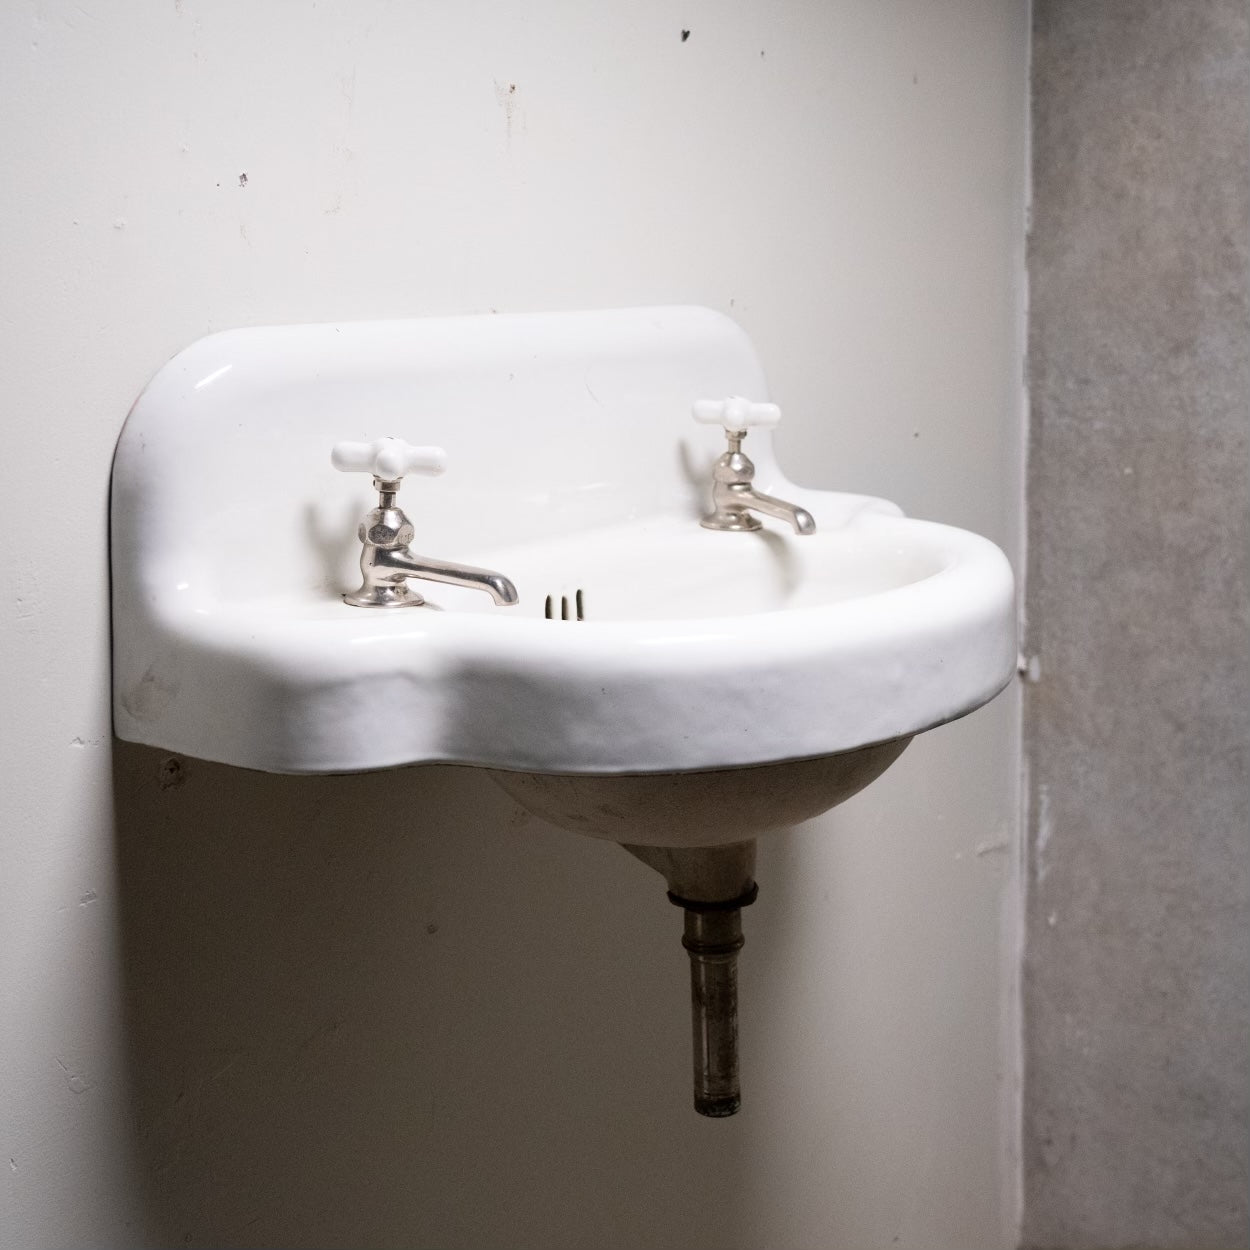 1920 Cast Iron Wall Mounted Porcelain Sink